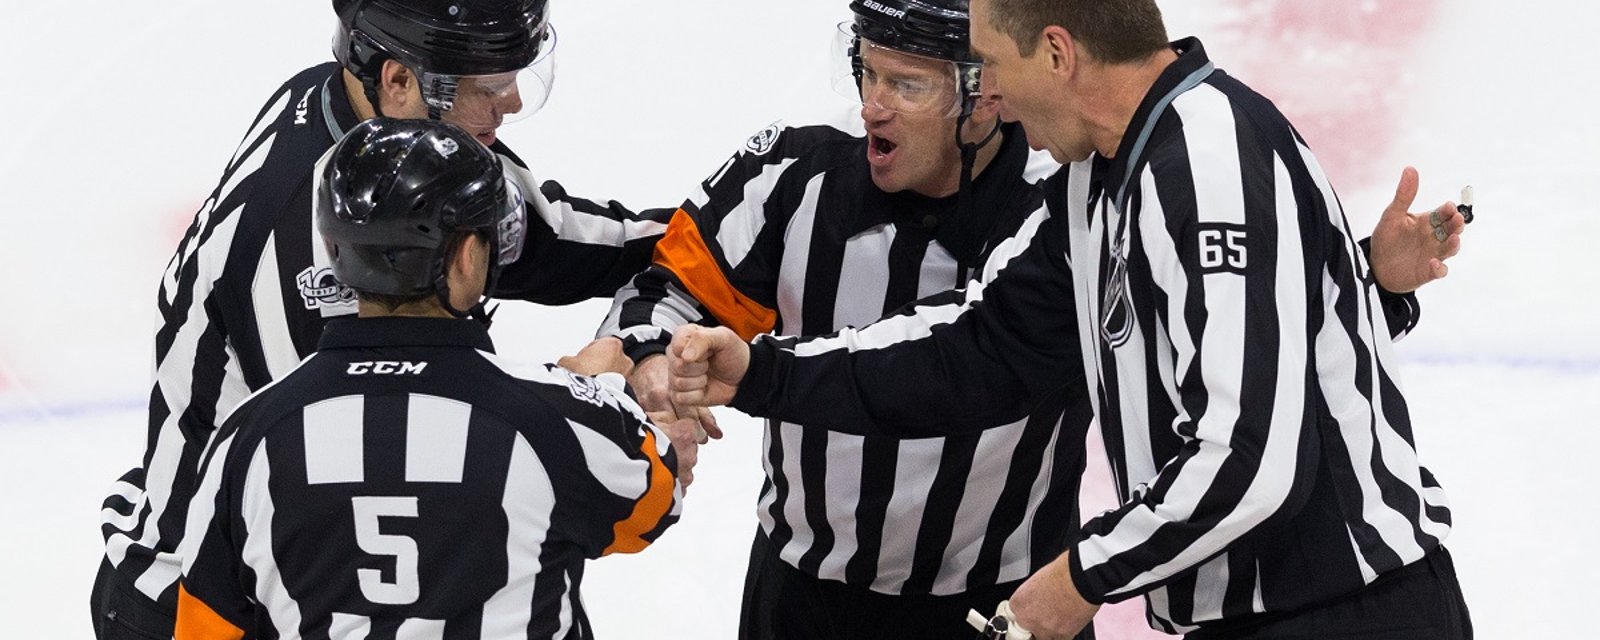 Outrage on social media over terrible, potentially game changing, calls from NHL officials.